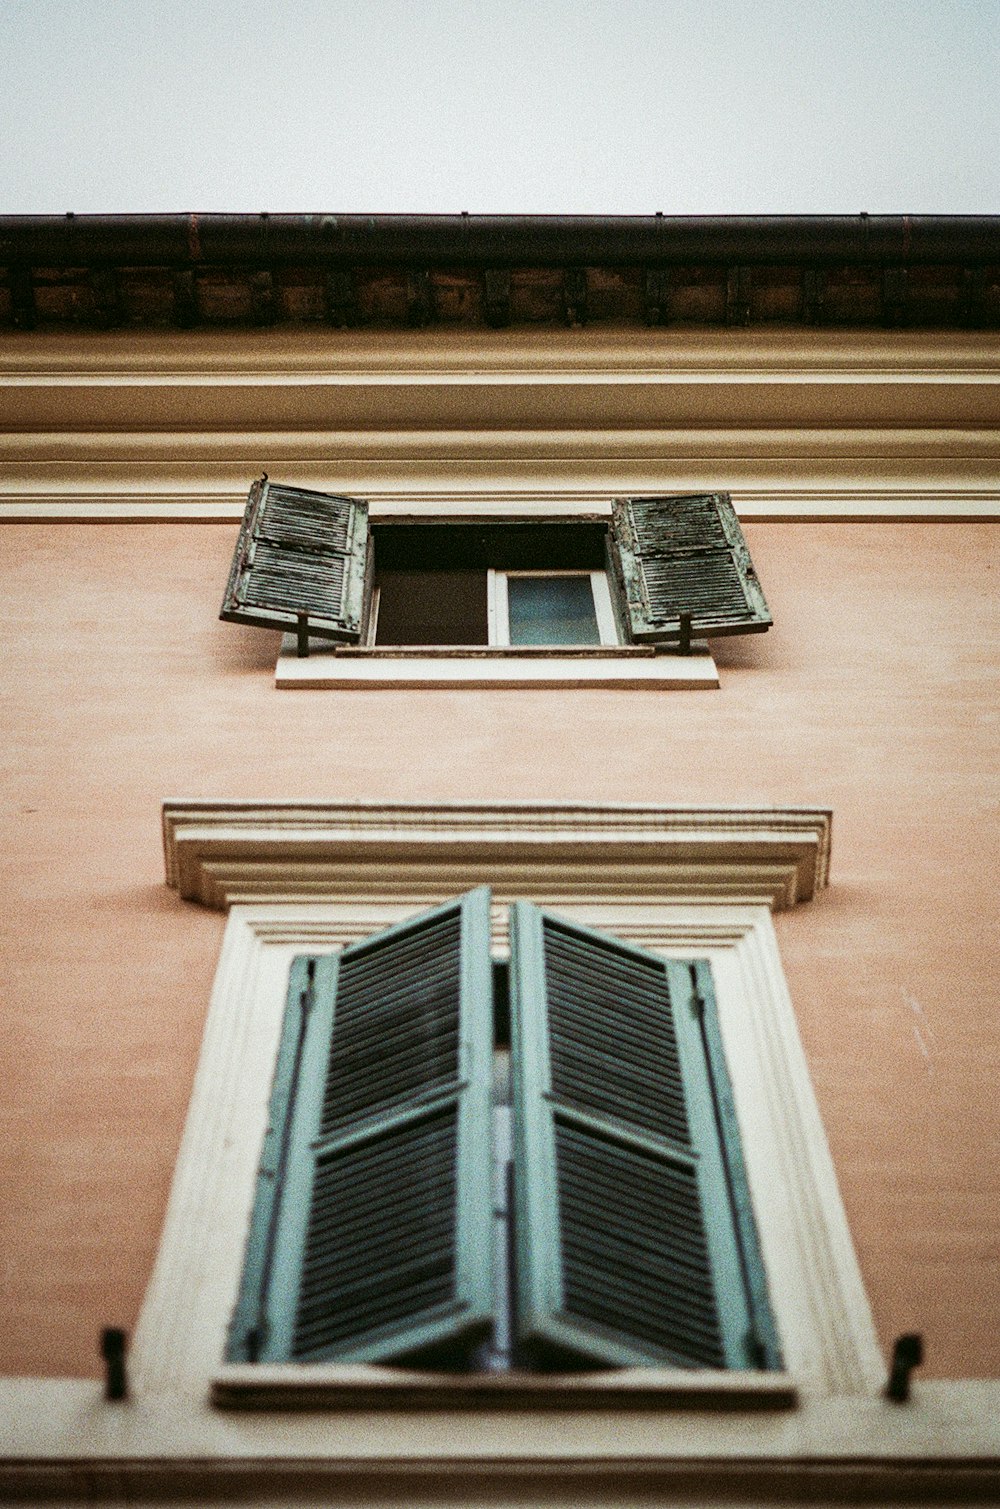 a window with a vent